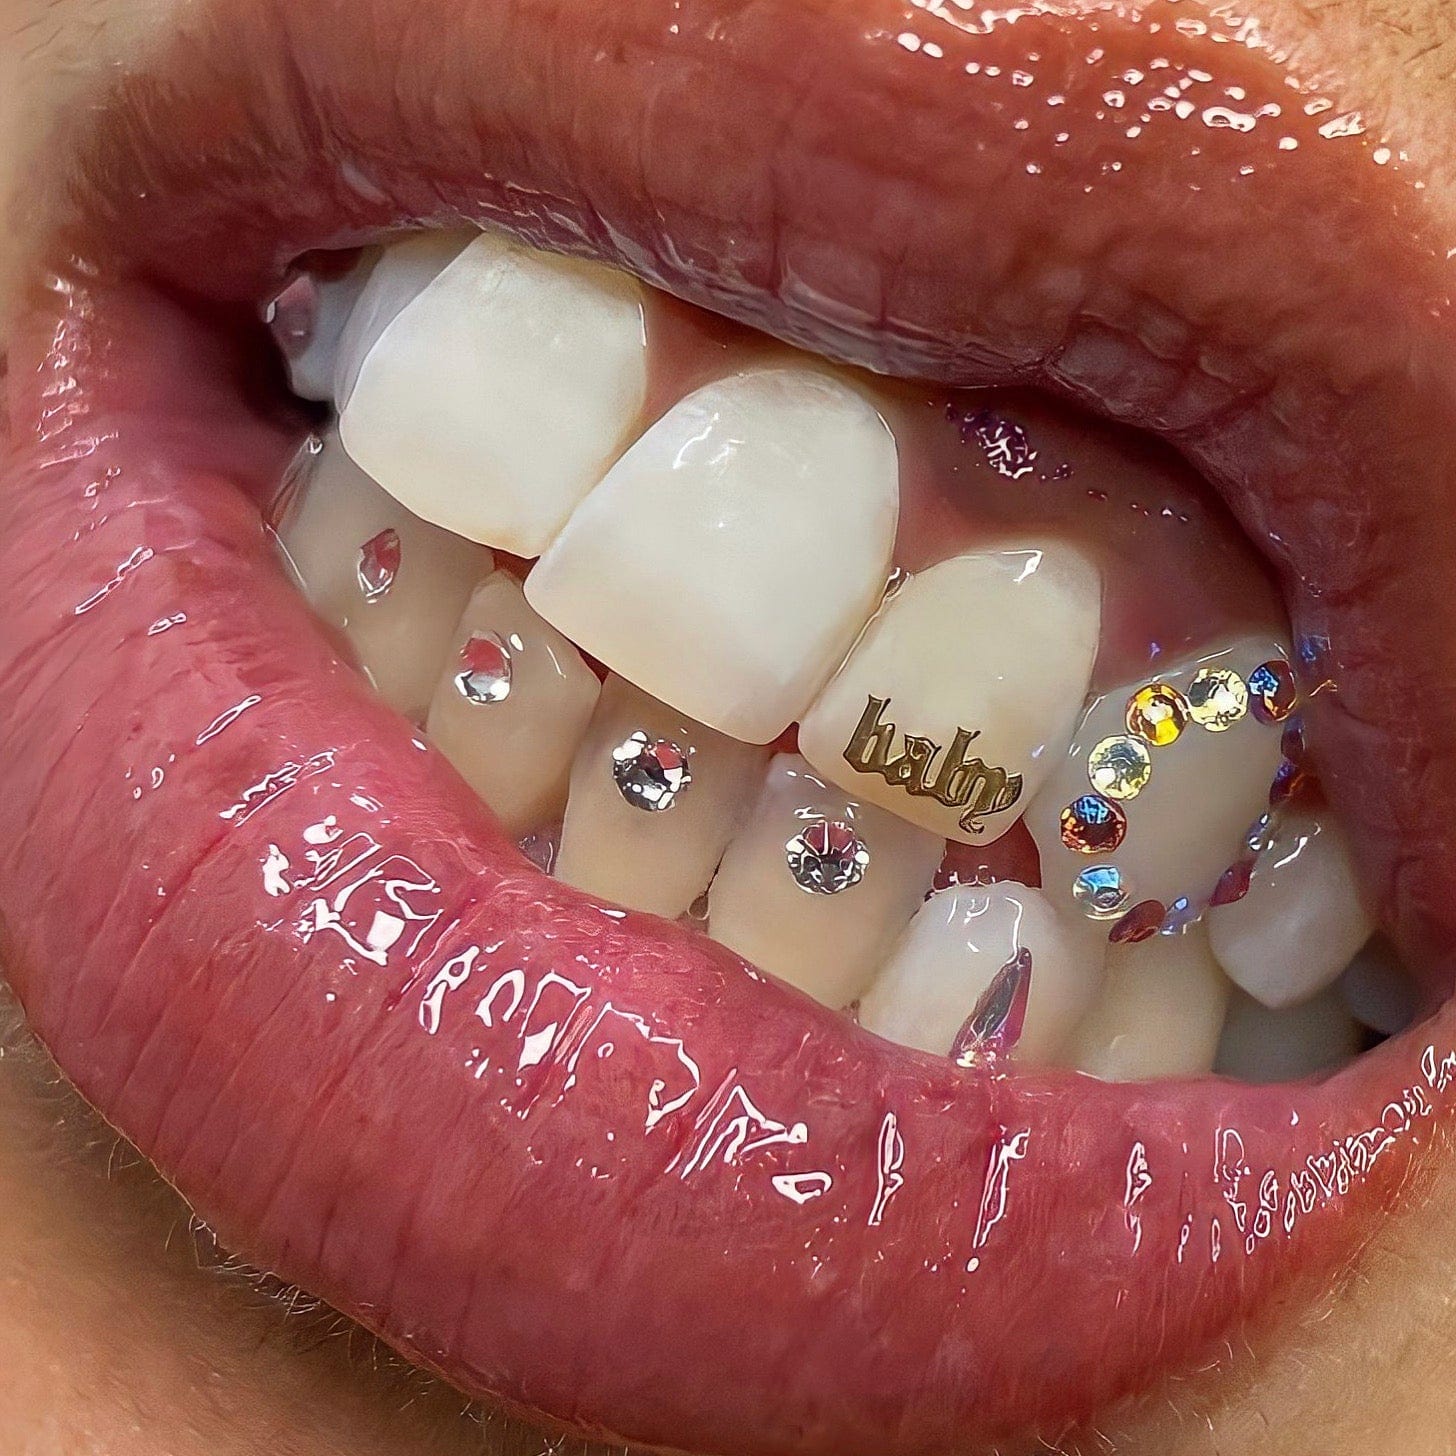 Bijoux dentaire Isis&gold Baby full word tooth gems